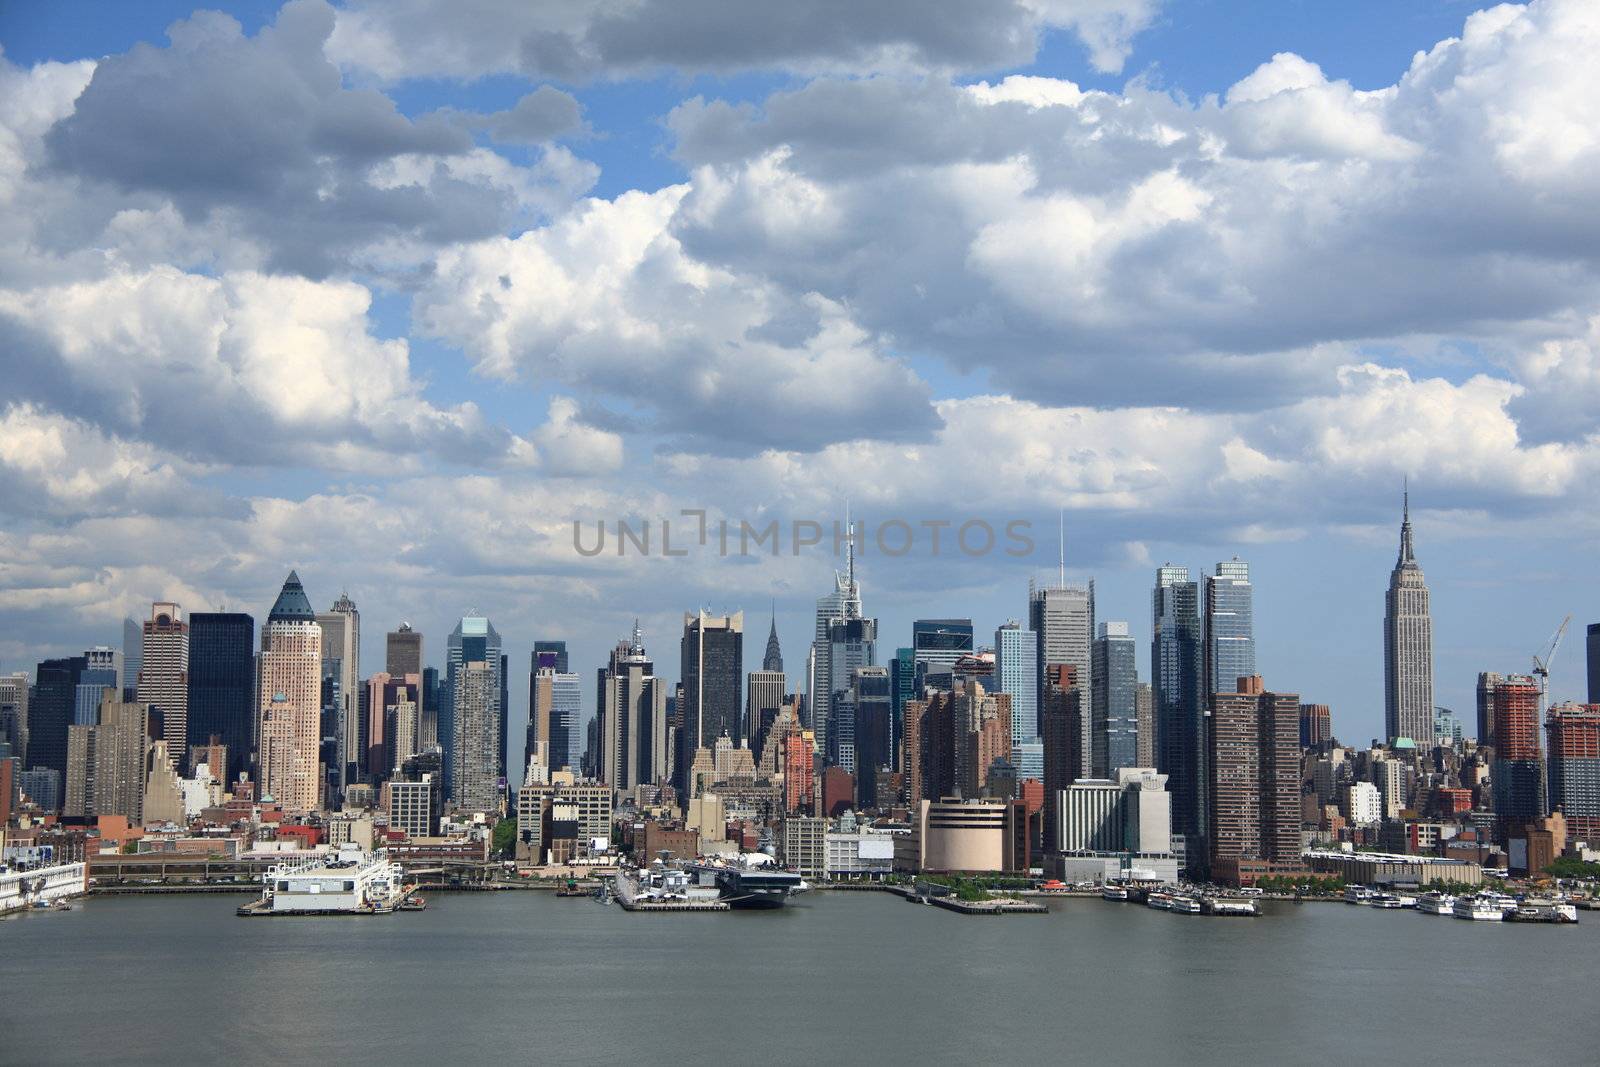 NYC buildings as seen from across the Hudson River in New Jersey